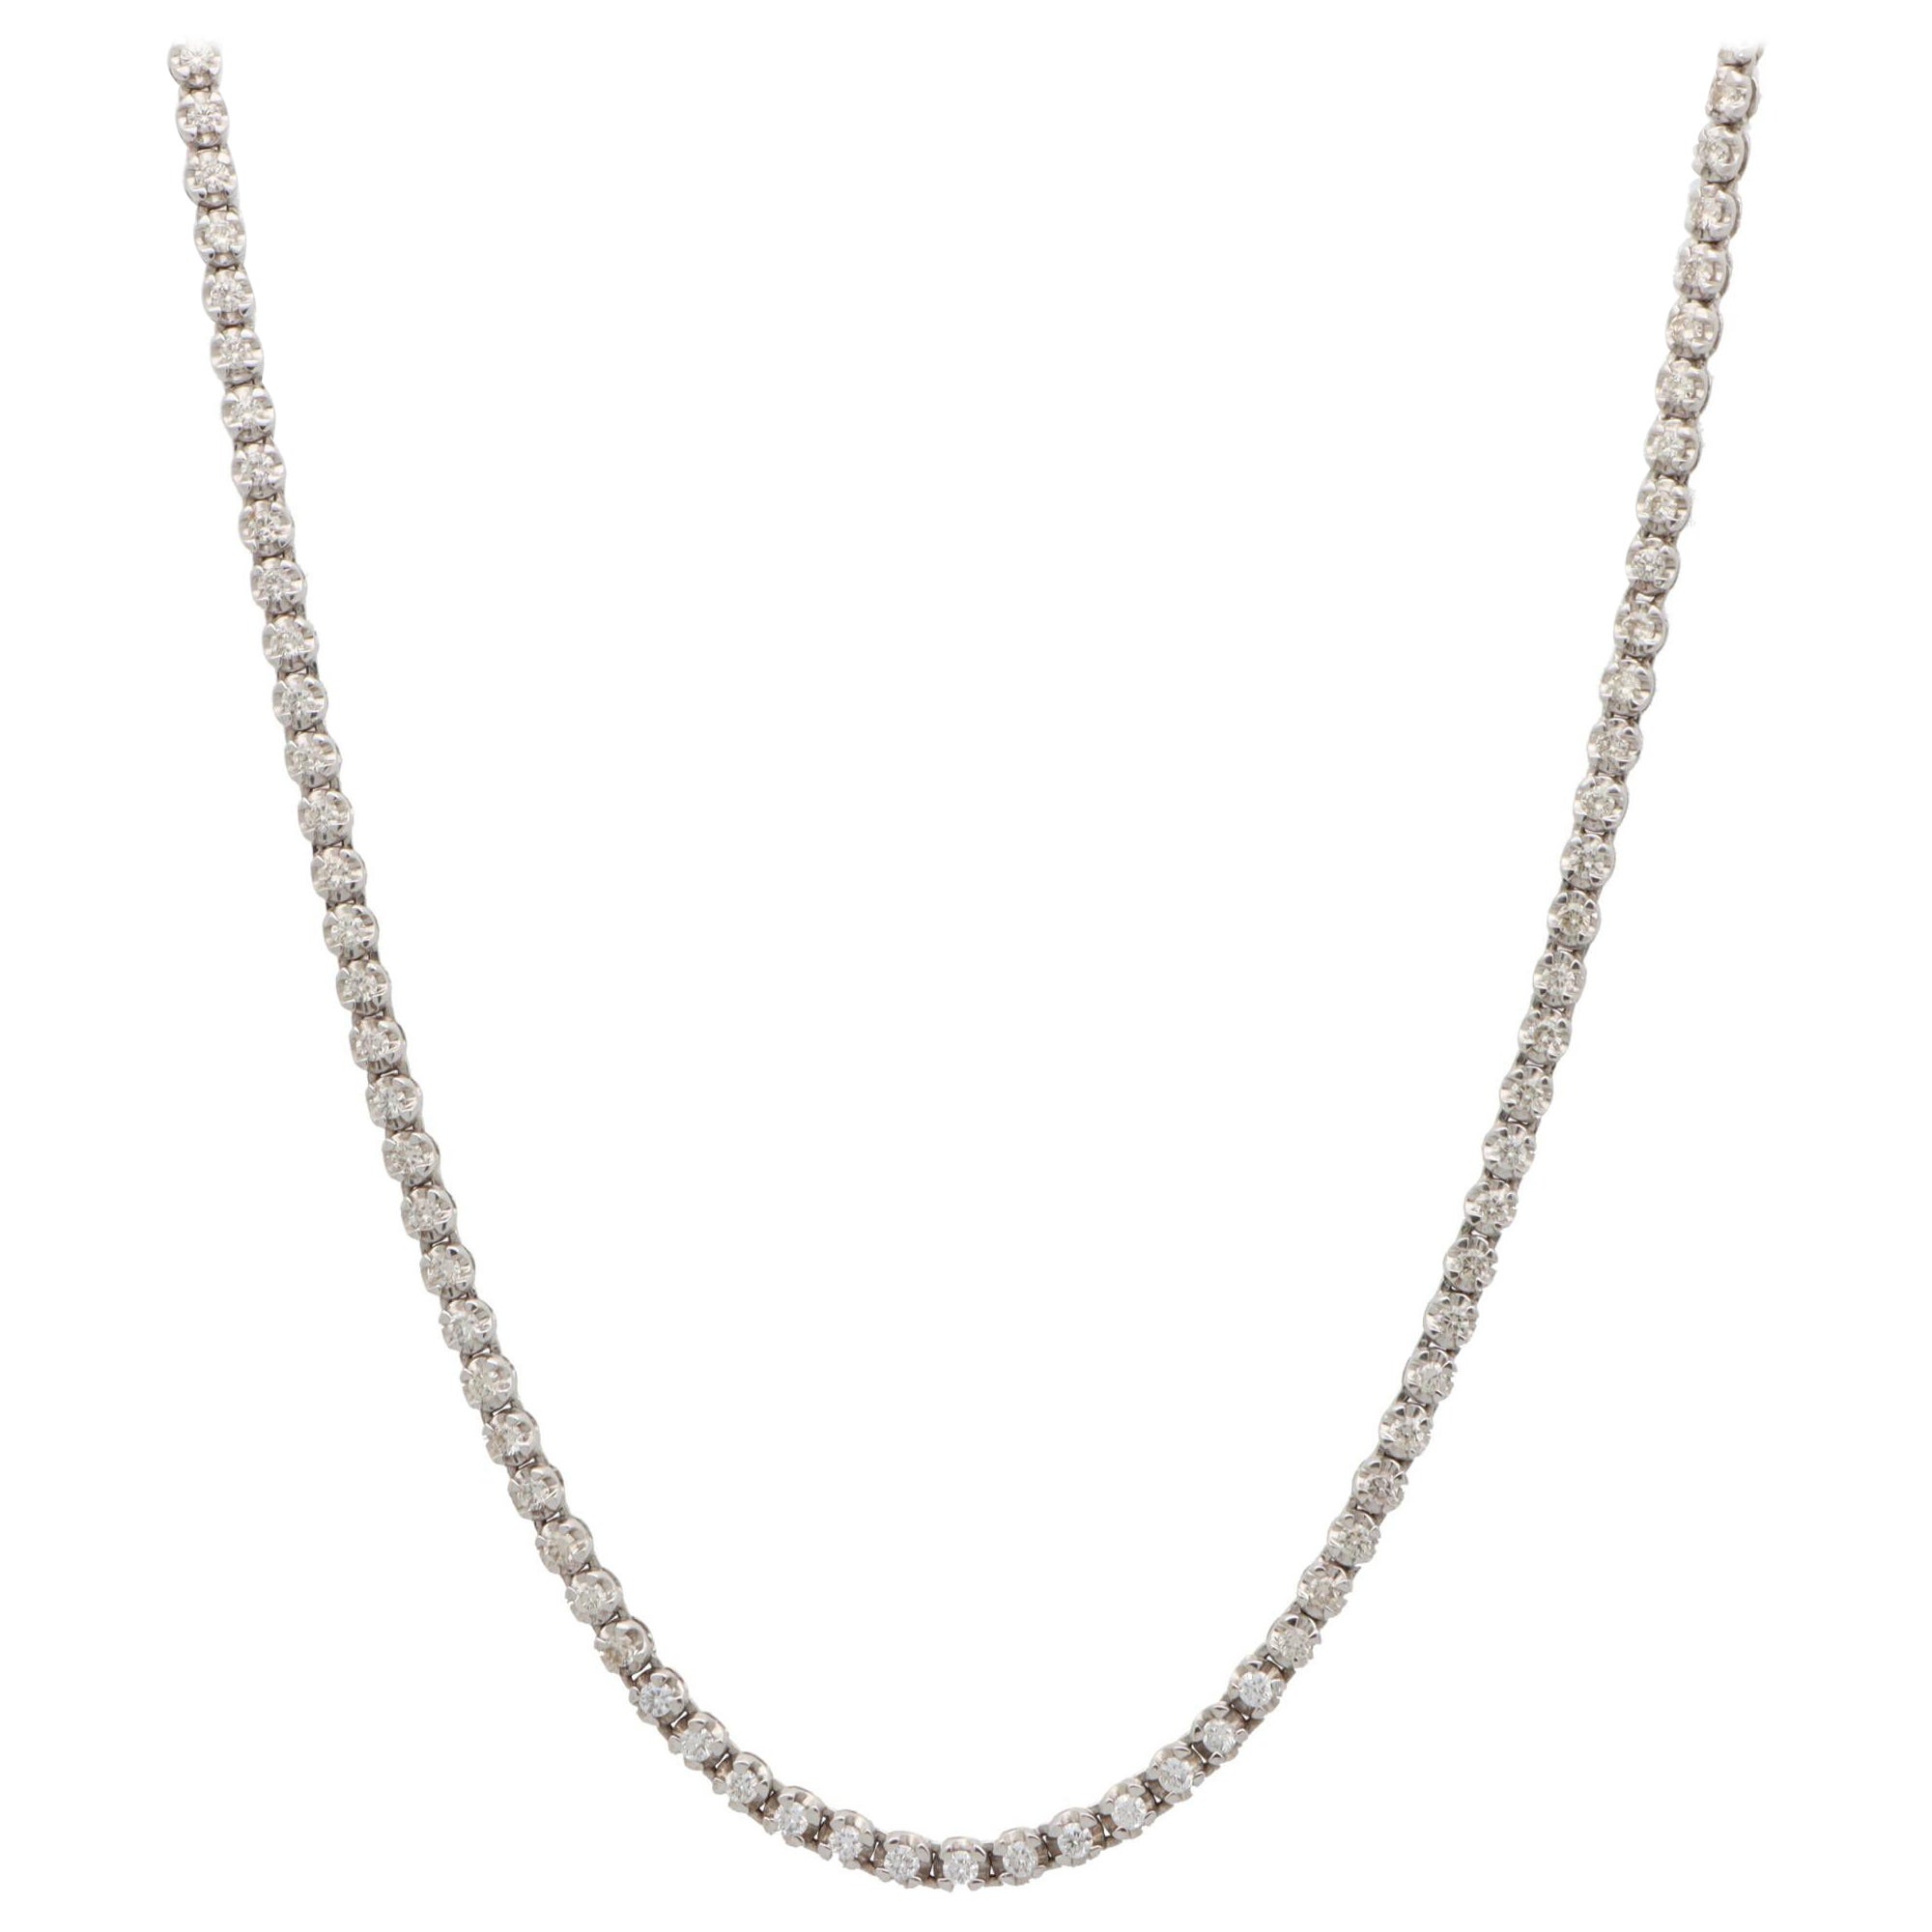 Diamond Riviere Necklace Set in 18k White Gold